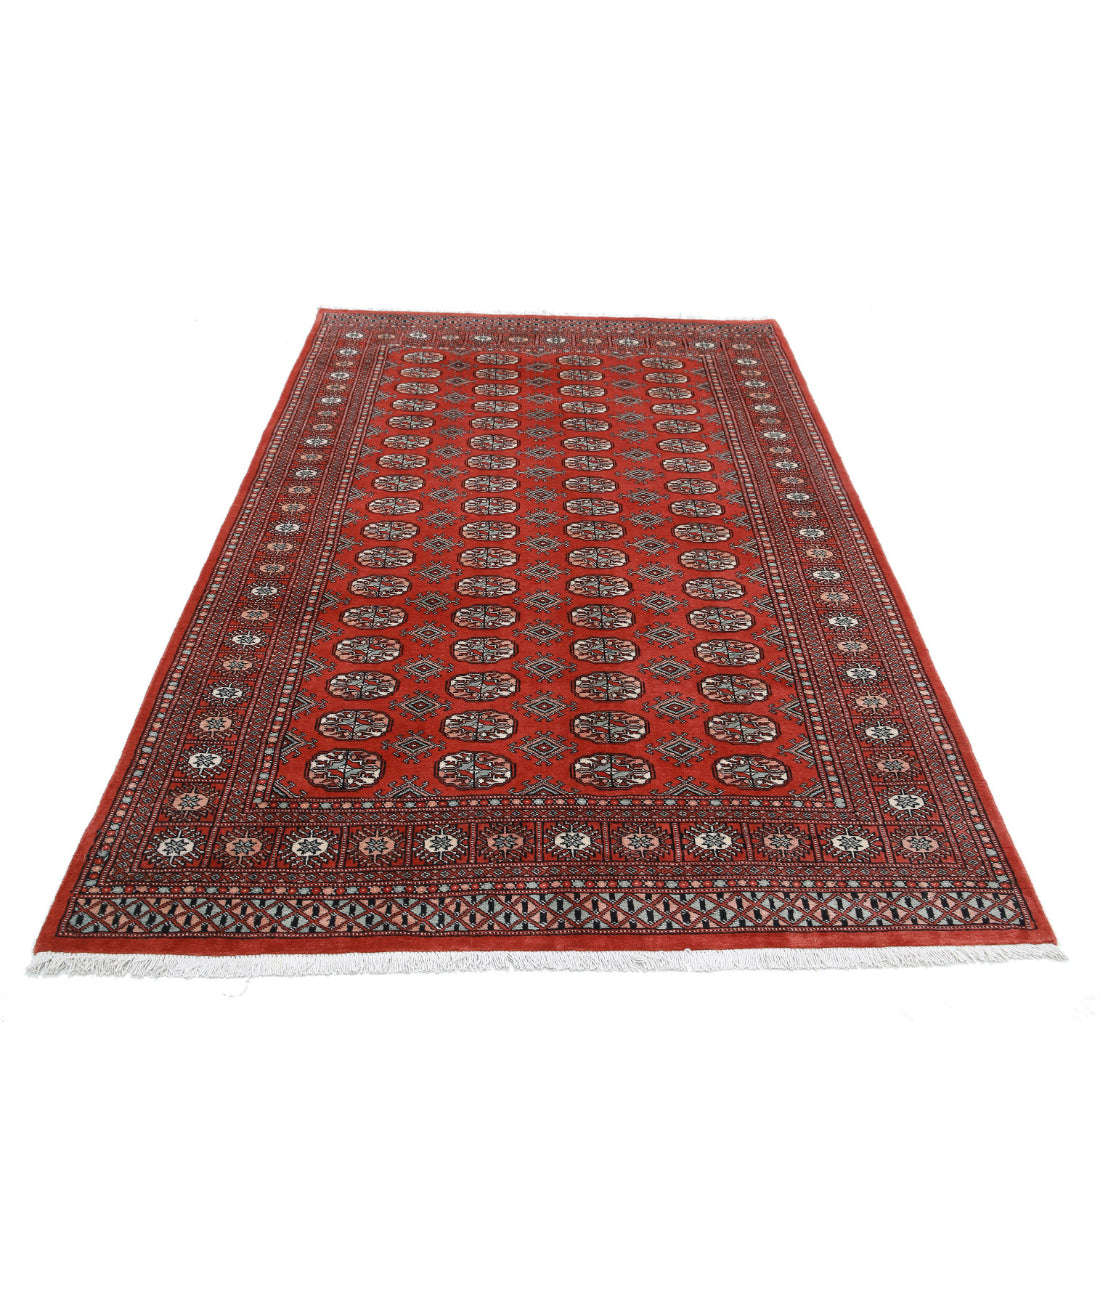 Hand Knotted Tribal Bokhara Wool Rug - 5'1'' x 8'2'' 5'1'' x 8'2'' (153 X 245) / Red / Black